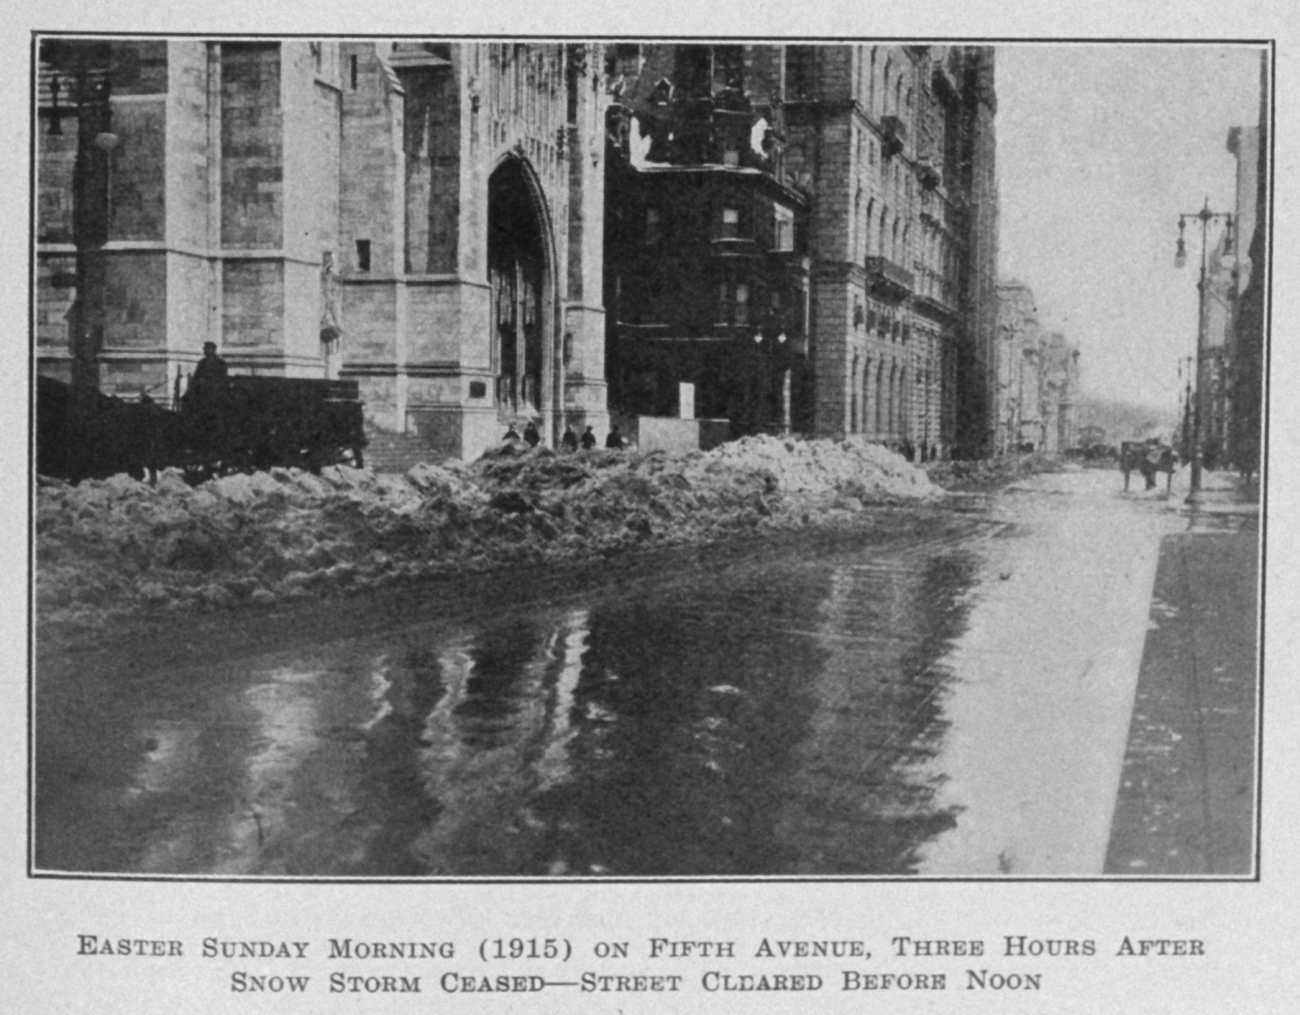 Snow removal in New York City in 'The Municipal Engineers Journal', Vol